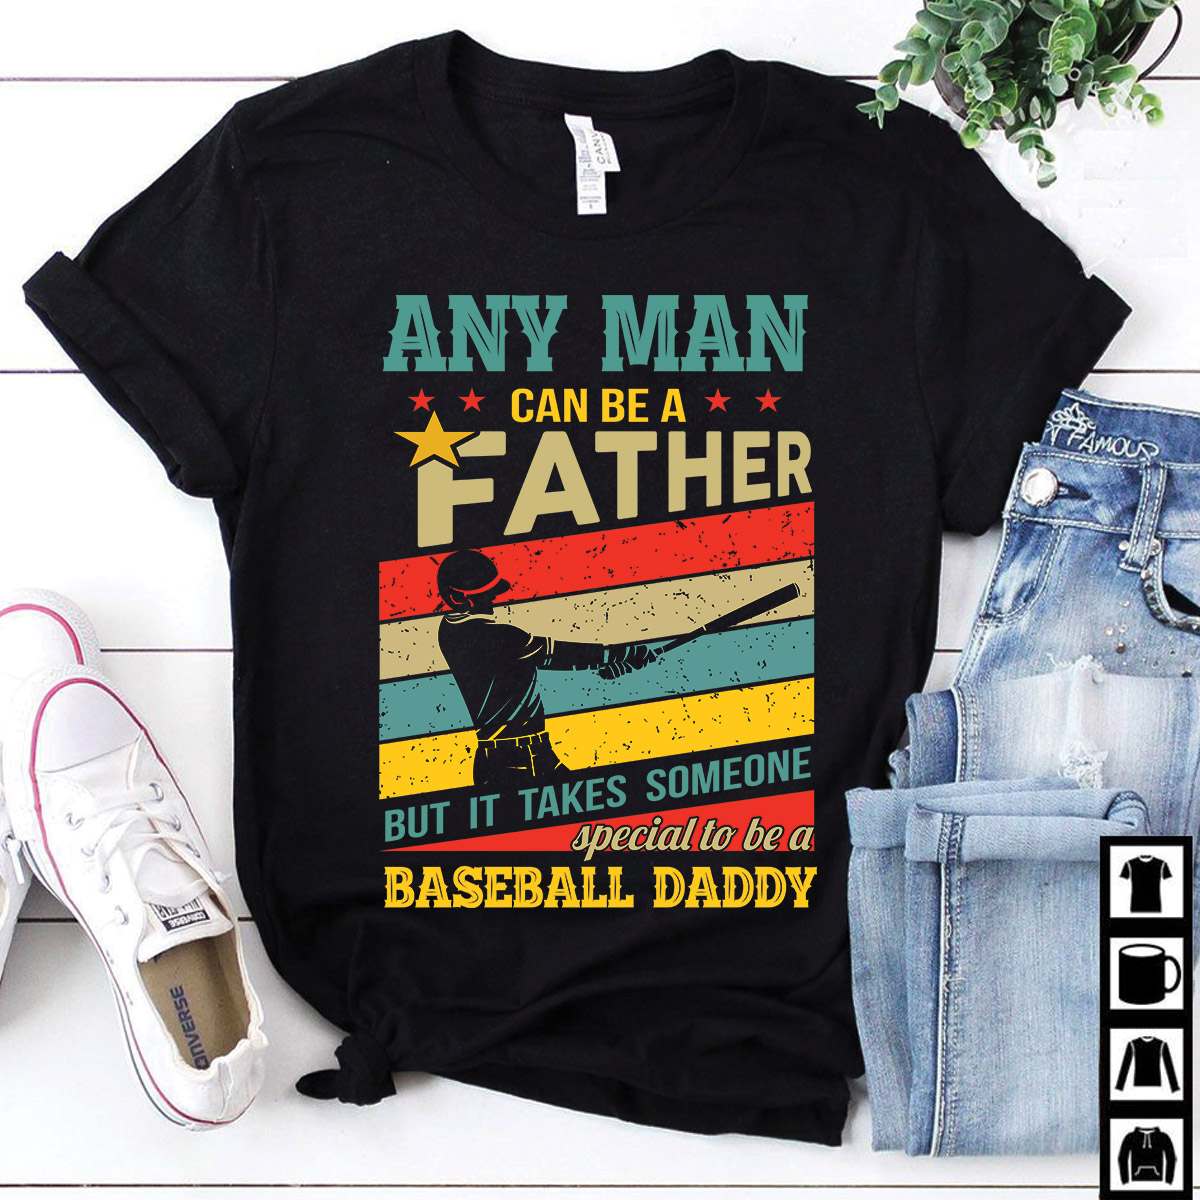 Baseball Daddy - Any man can be a father but it takes someone special to be a baseball daddy